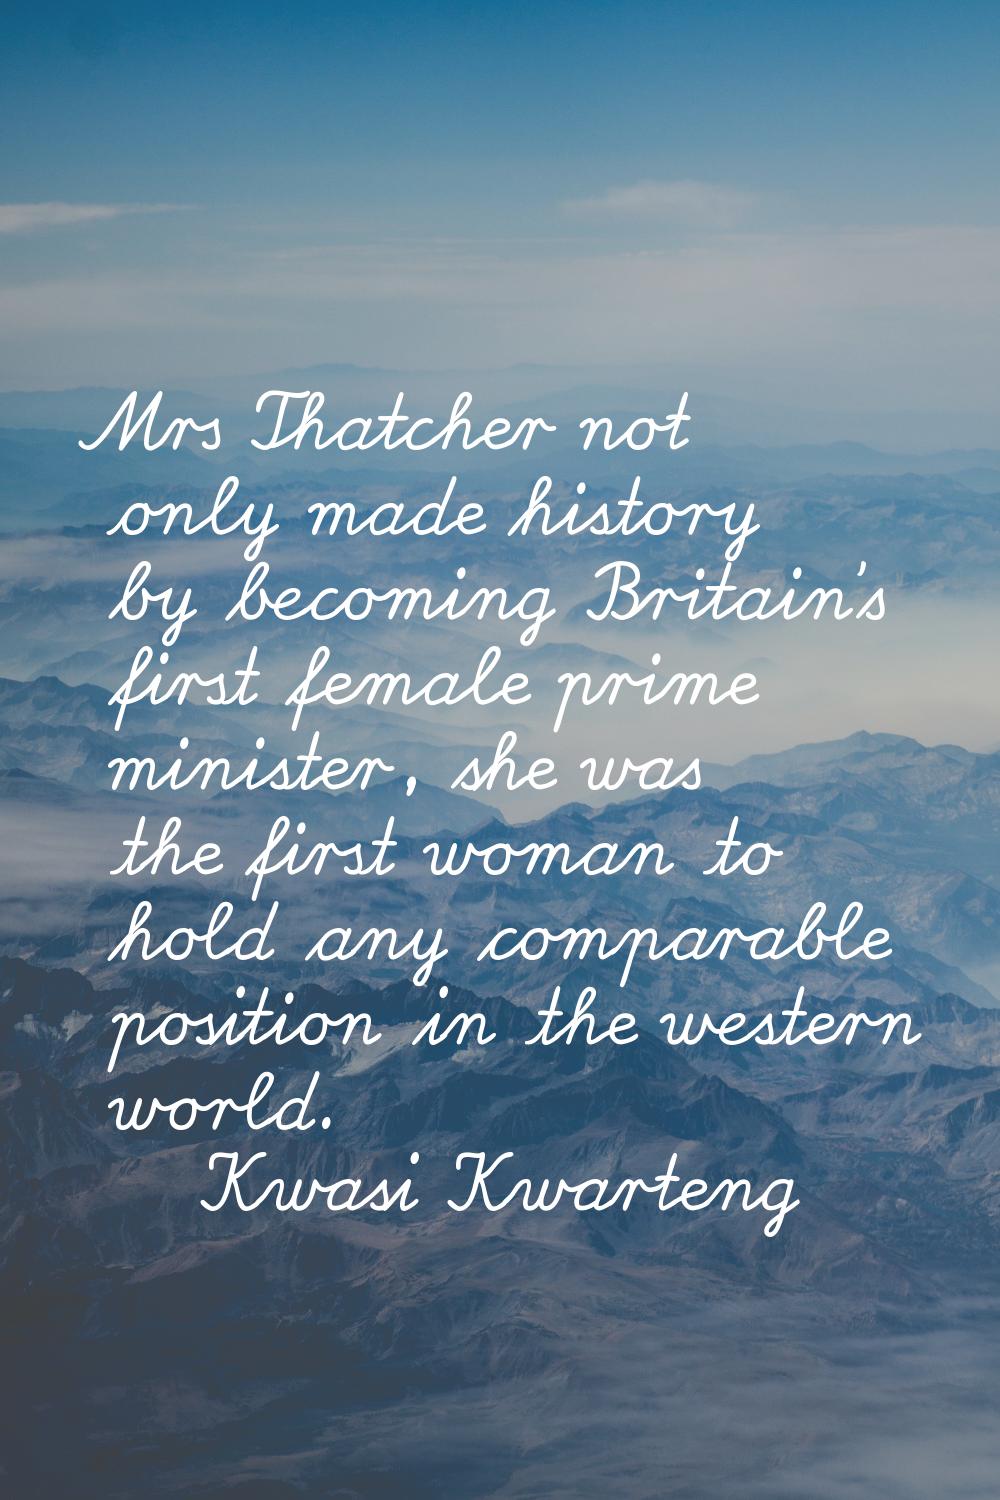 Mrs Thatcher not only made history by becoming Britain’s first female prime minister, she was the f